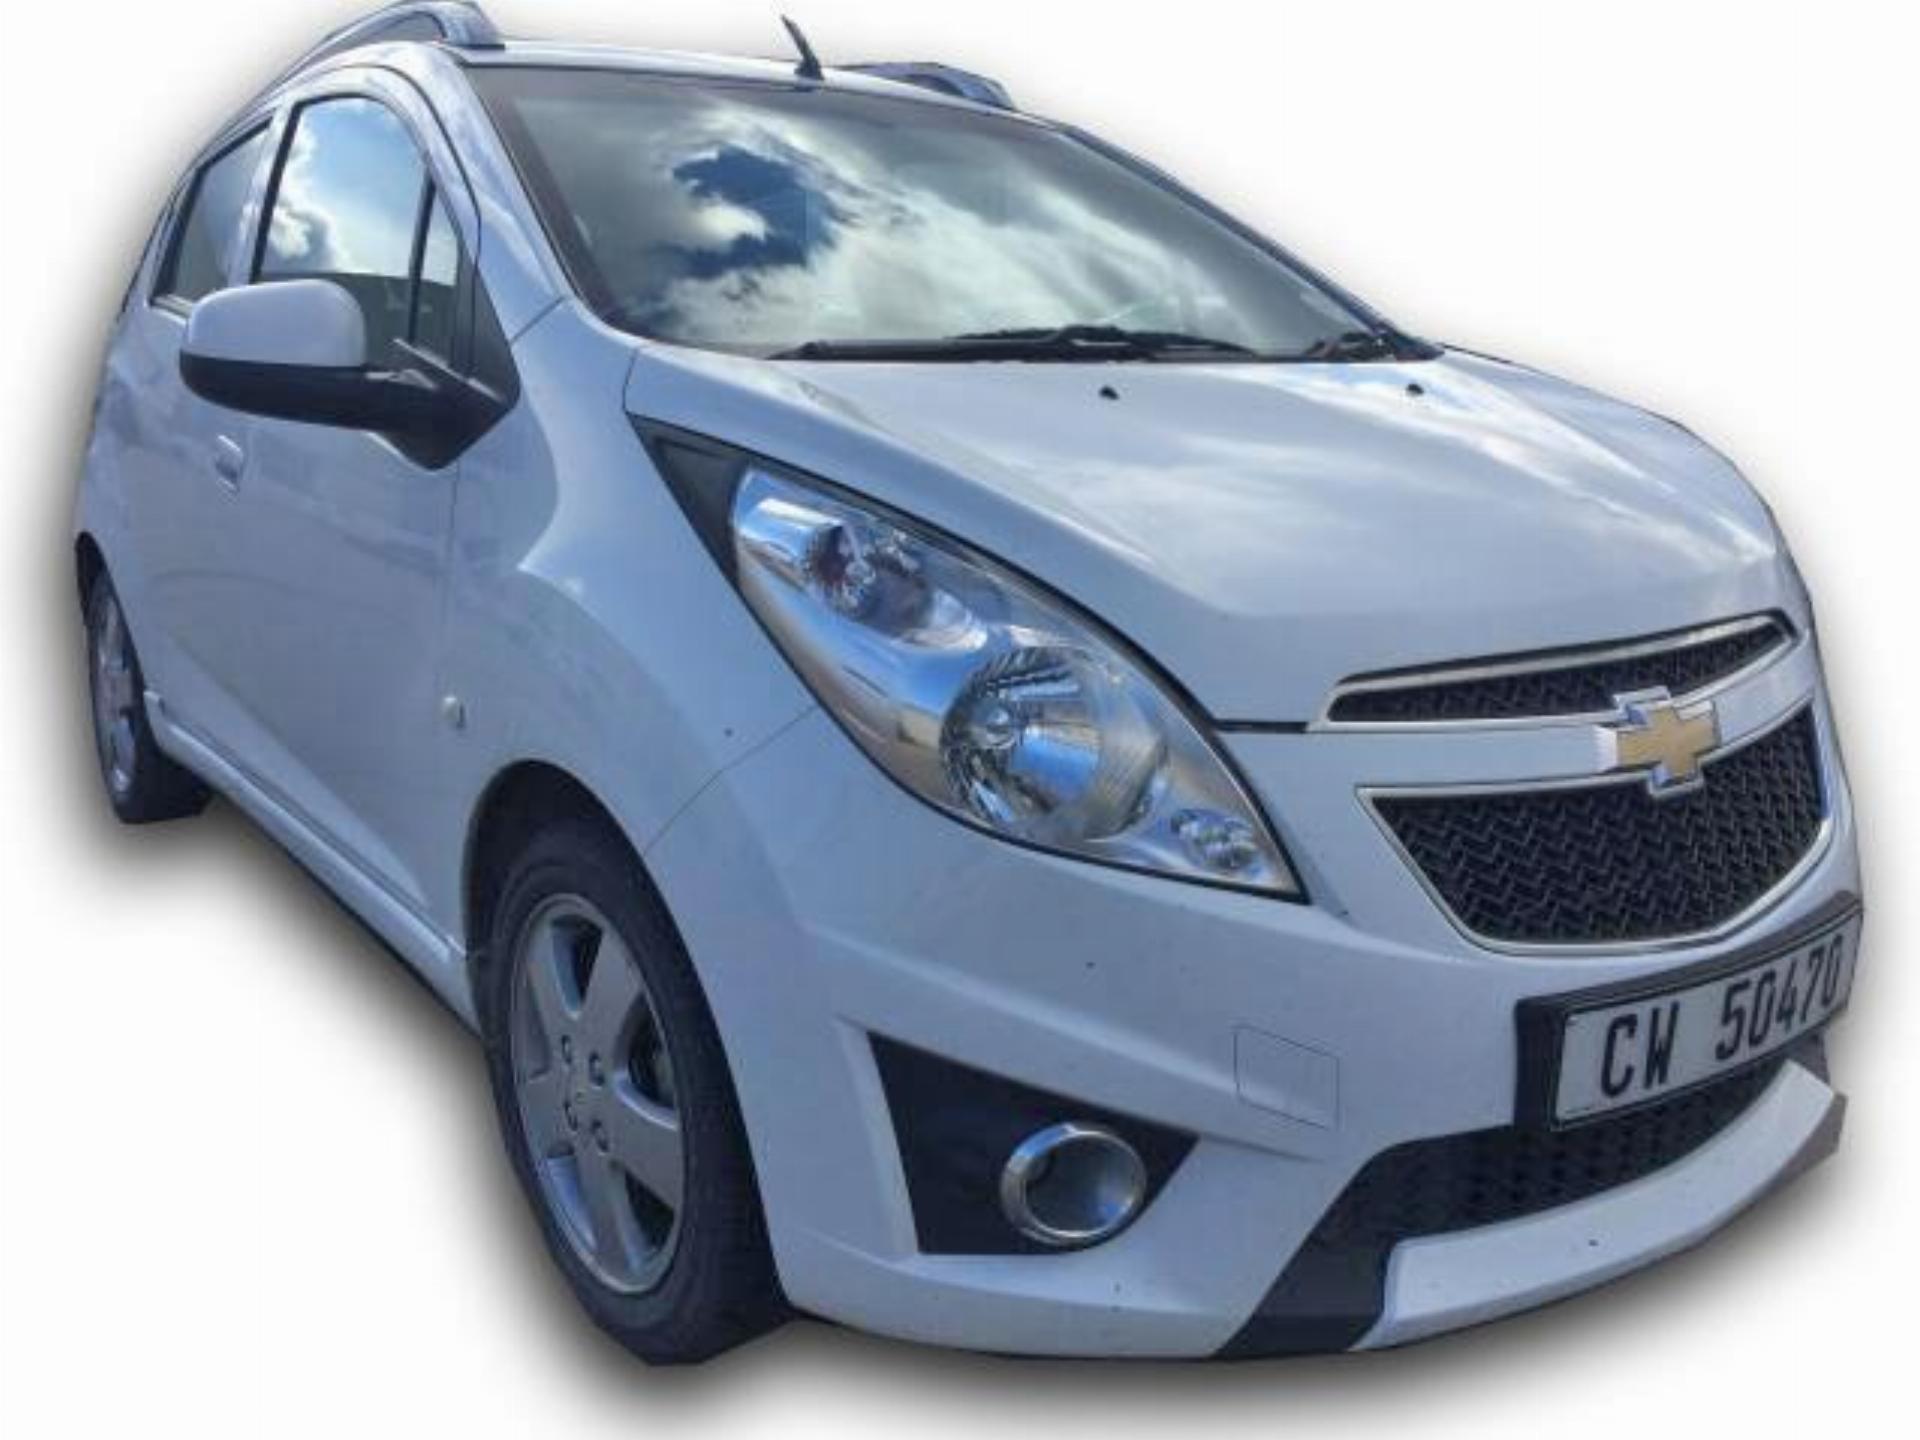 Used Chevrolet Spark 1.2 LS 5 DR 2012 on auction PV1012502